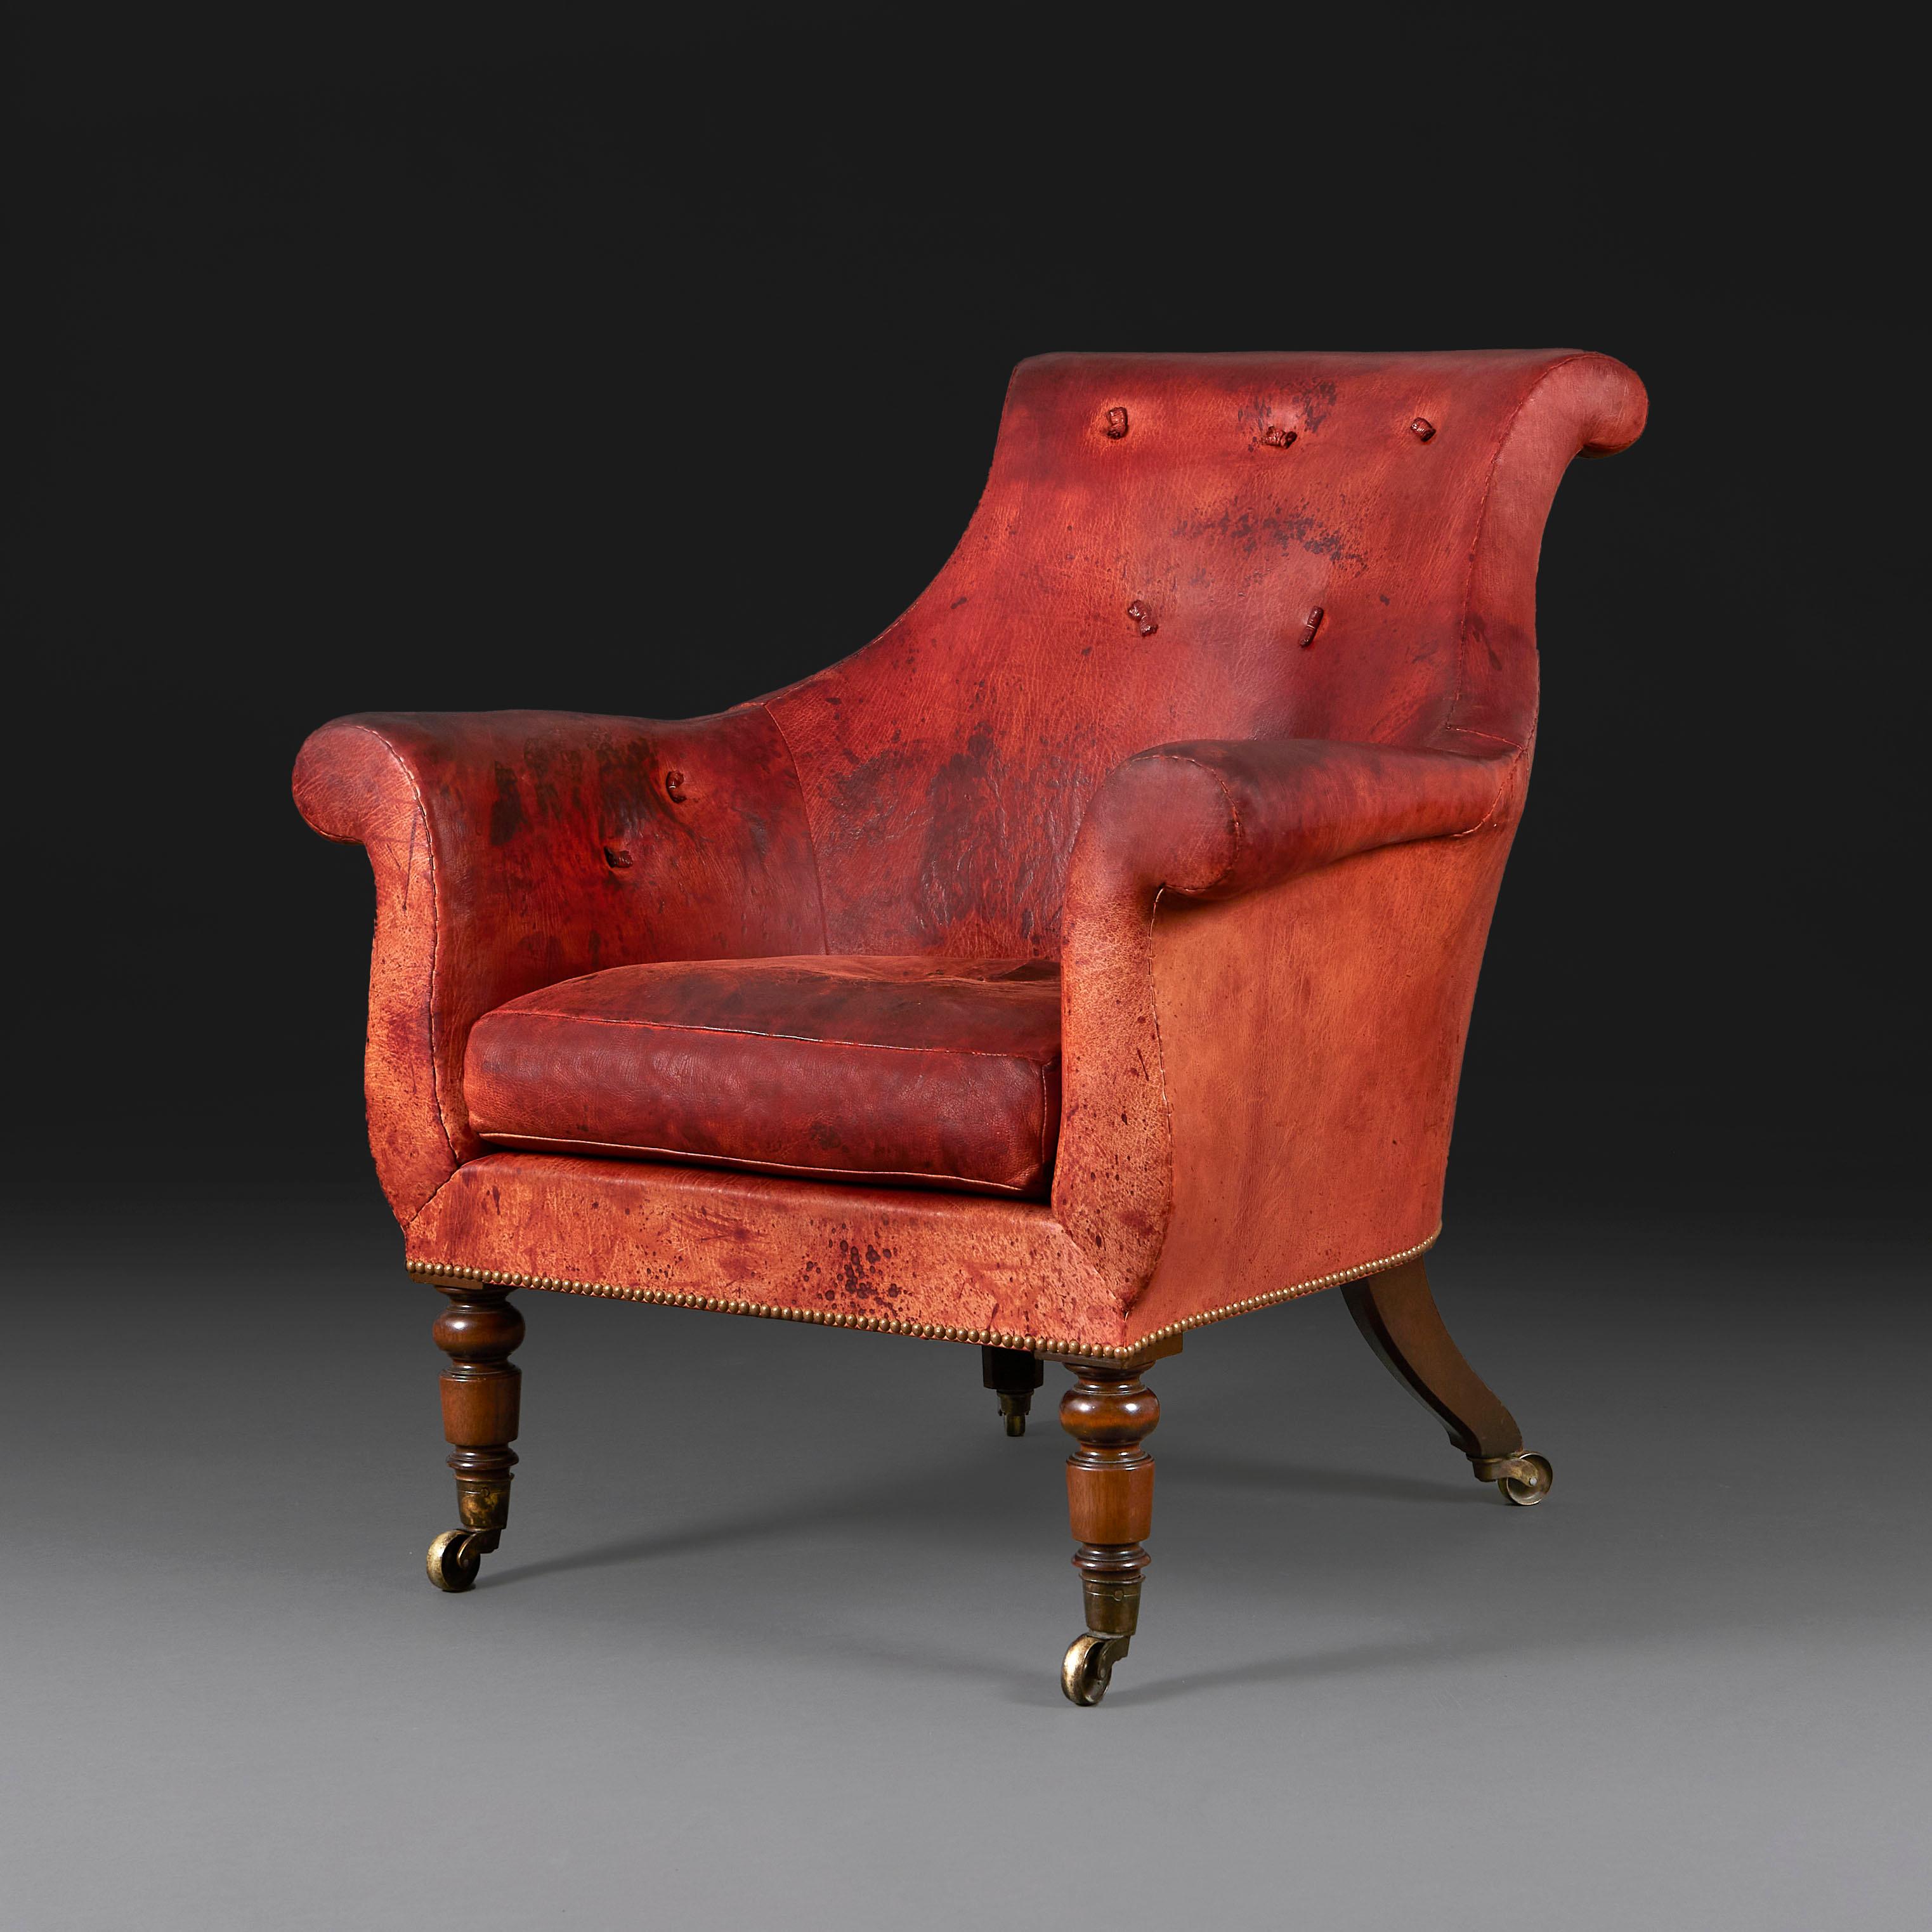 England, 20th century

A William IV style twentieth century library armchair of large scale, with exceptional red patinated leather. The back deep buttoned with tufts, seat cushion, the frame constructed from stained beechwood, with turned legs